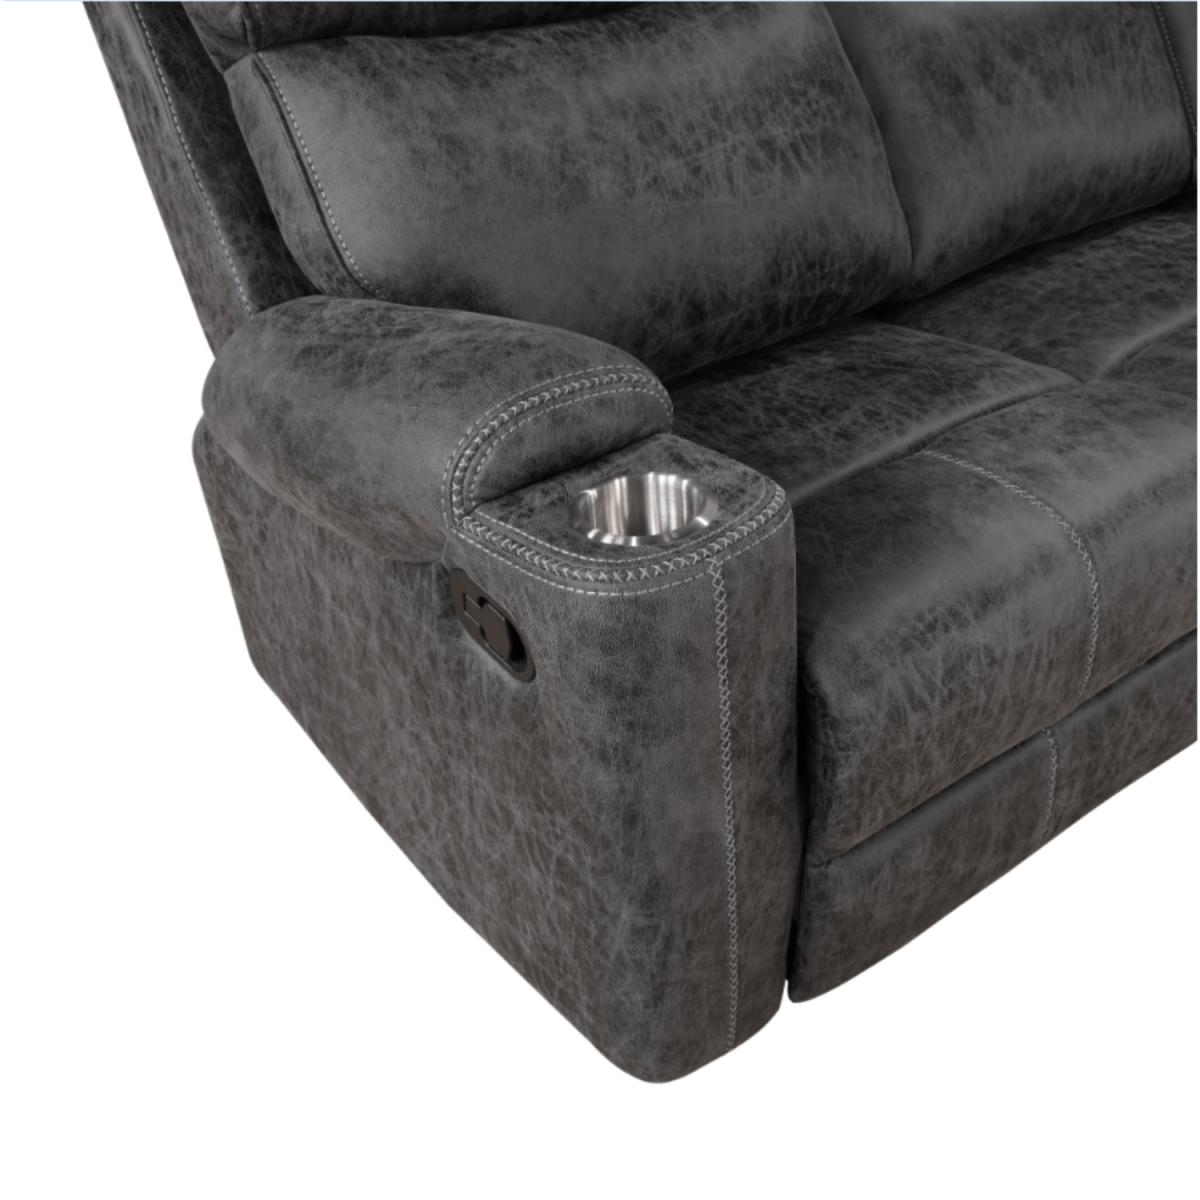 SILLON RECLINABLE 3 PERS. GRIS OSC.